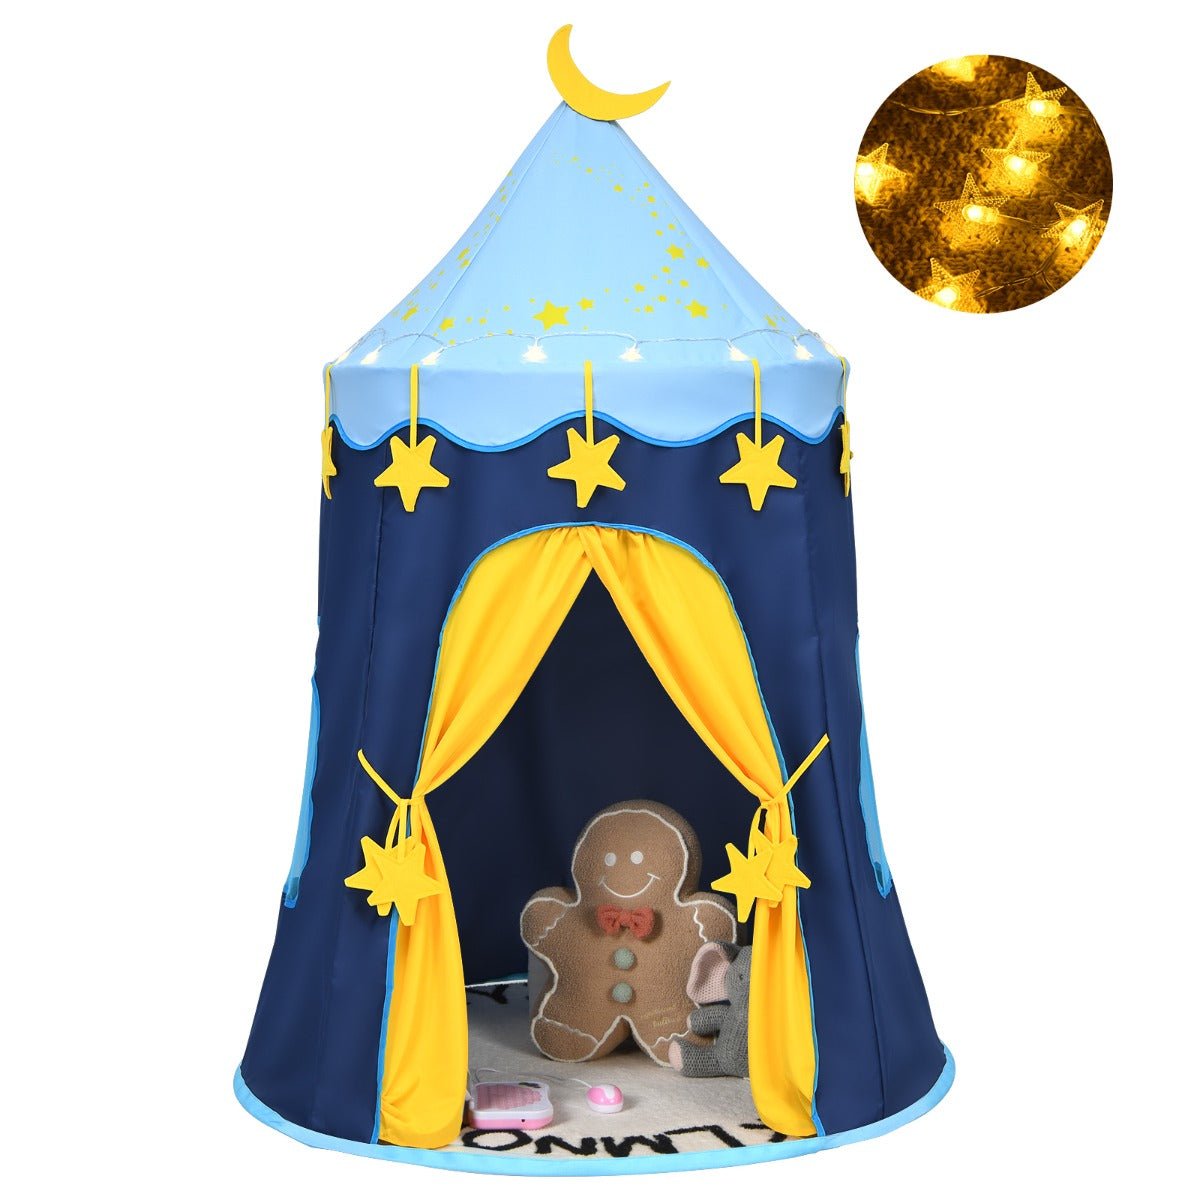 1Portable Wonderland: Kids Play Tent with Star Lights & Carry Bag